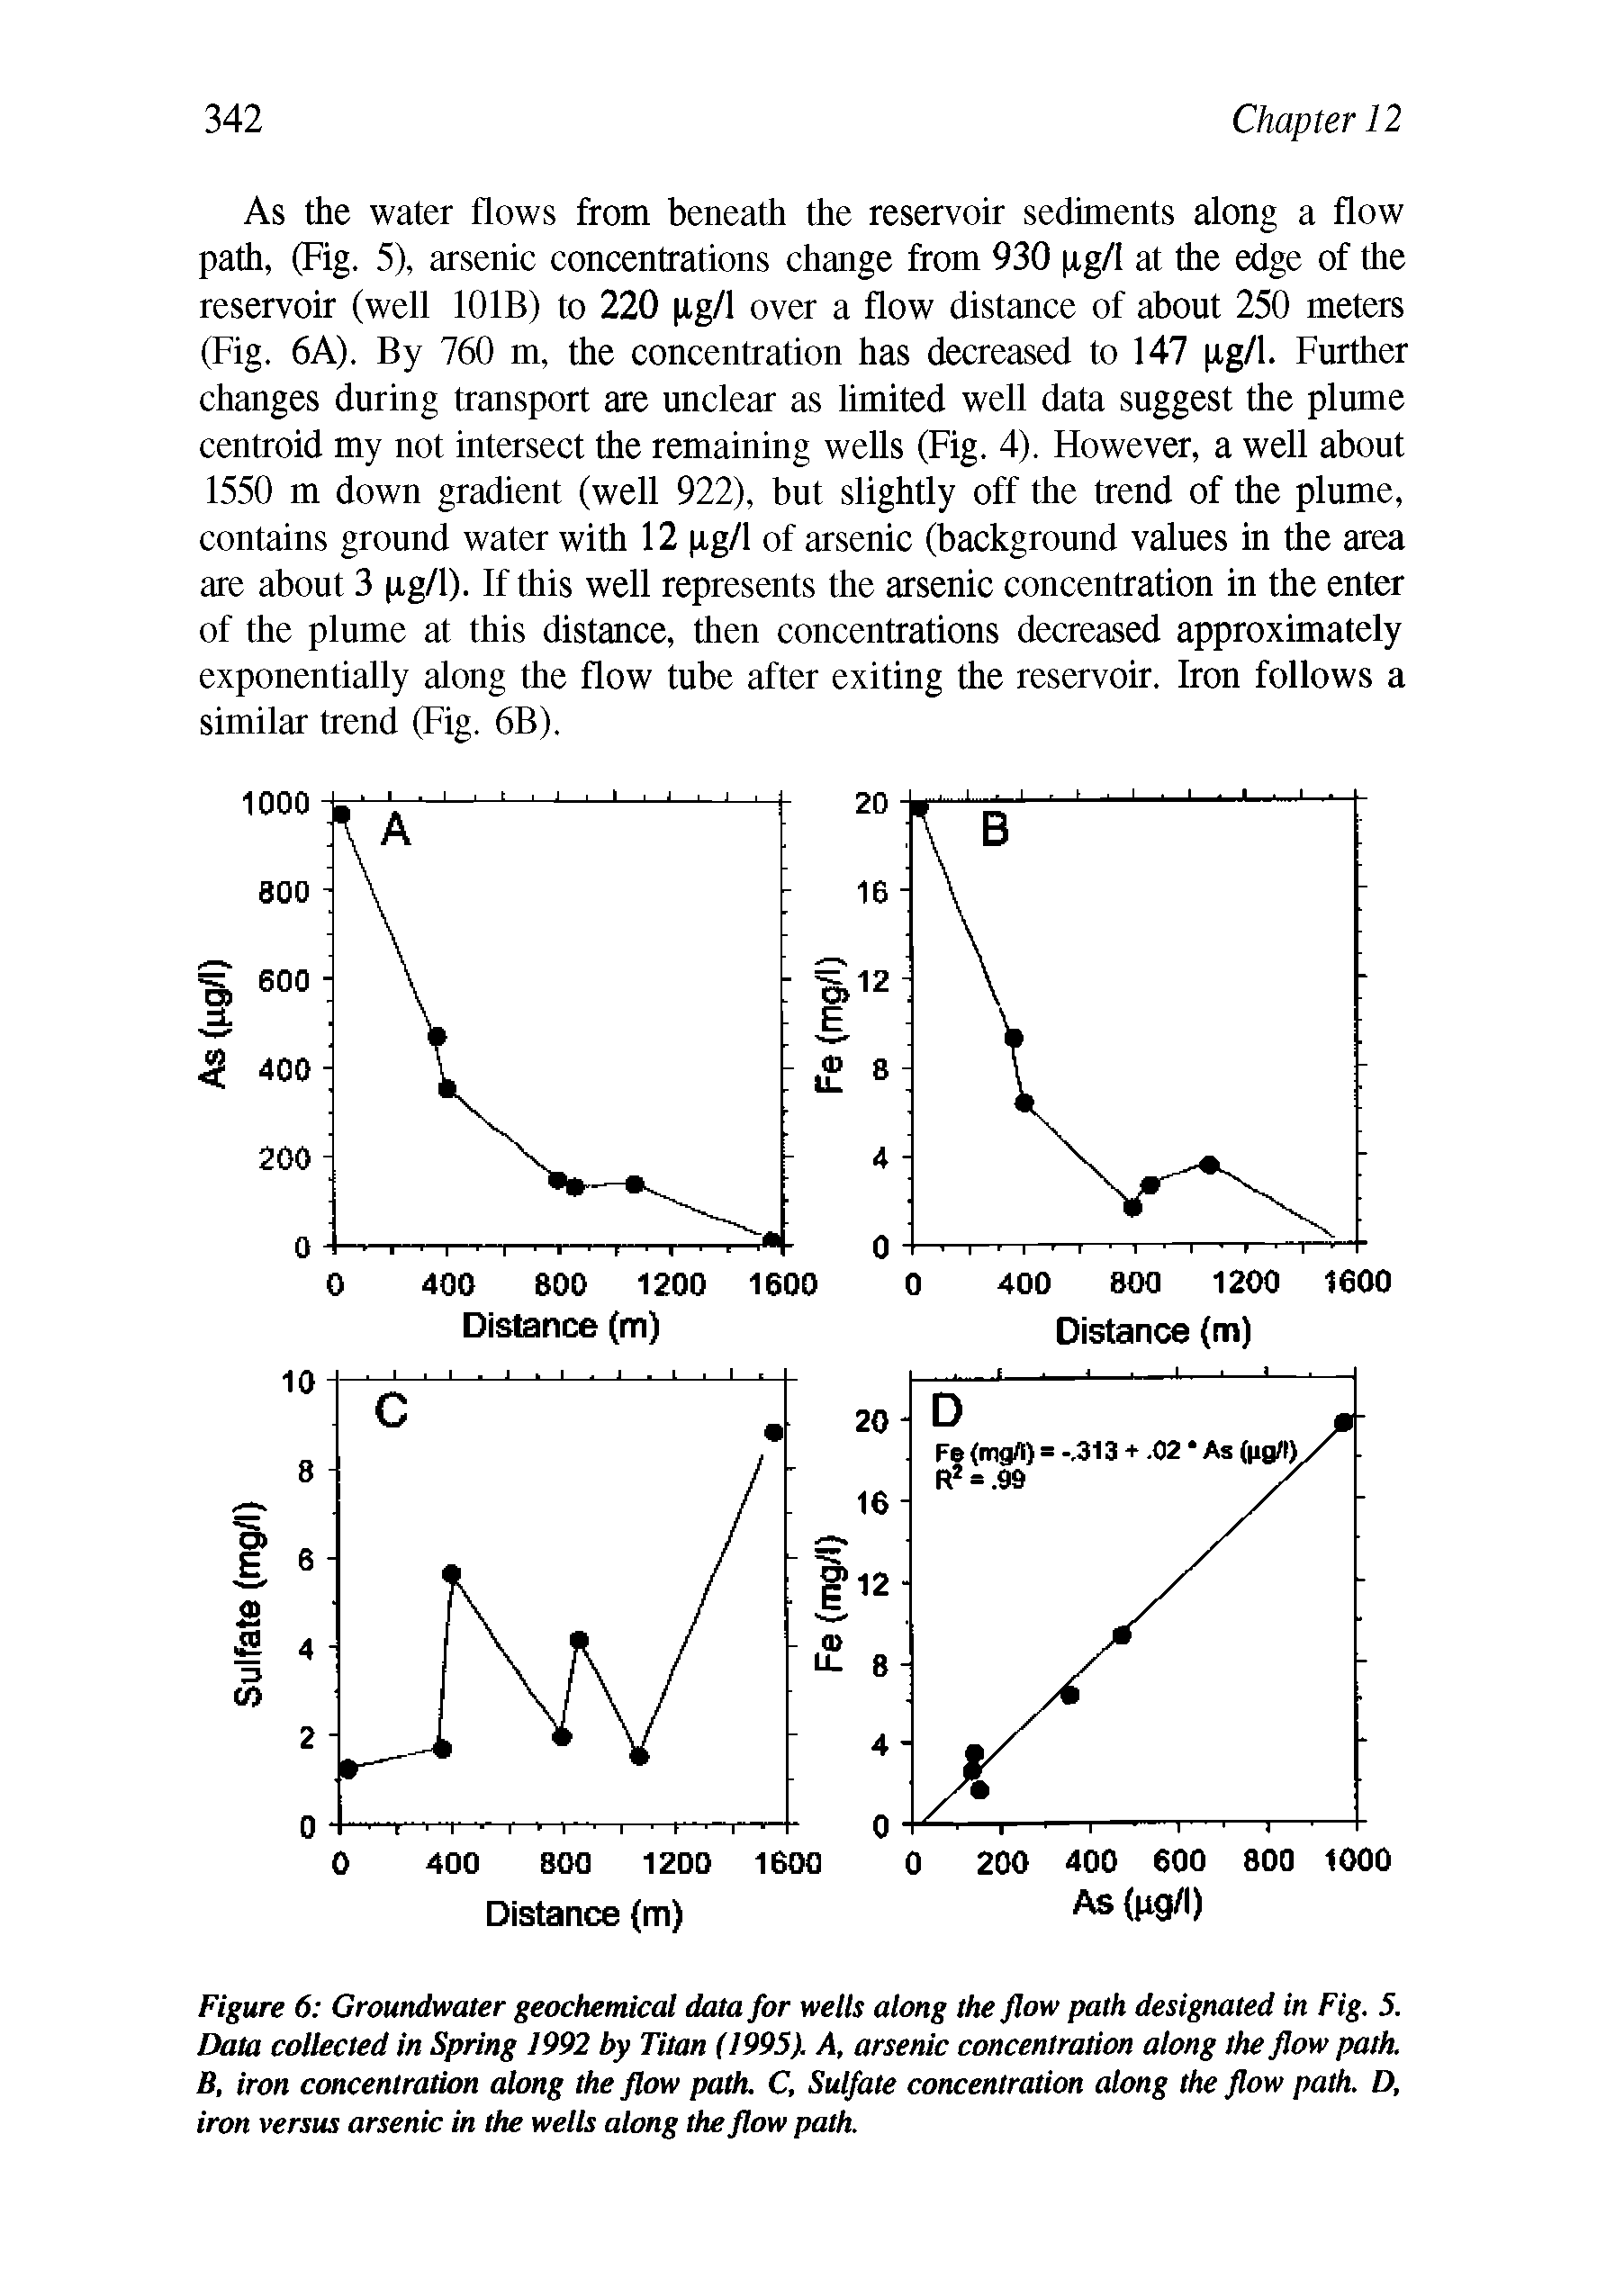 Figure 6 Groundwater geochemical data for wells along the flow path designated in Fig. 5. Data collected in Spring 1992 by Titan (1995). A, arsenic concentration along the flow path. B, iron concentration along the flow path. C, Sulfate concentration along the flow path. D, iron versus arsenic in the wells along the flow path.